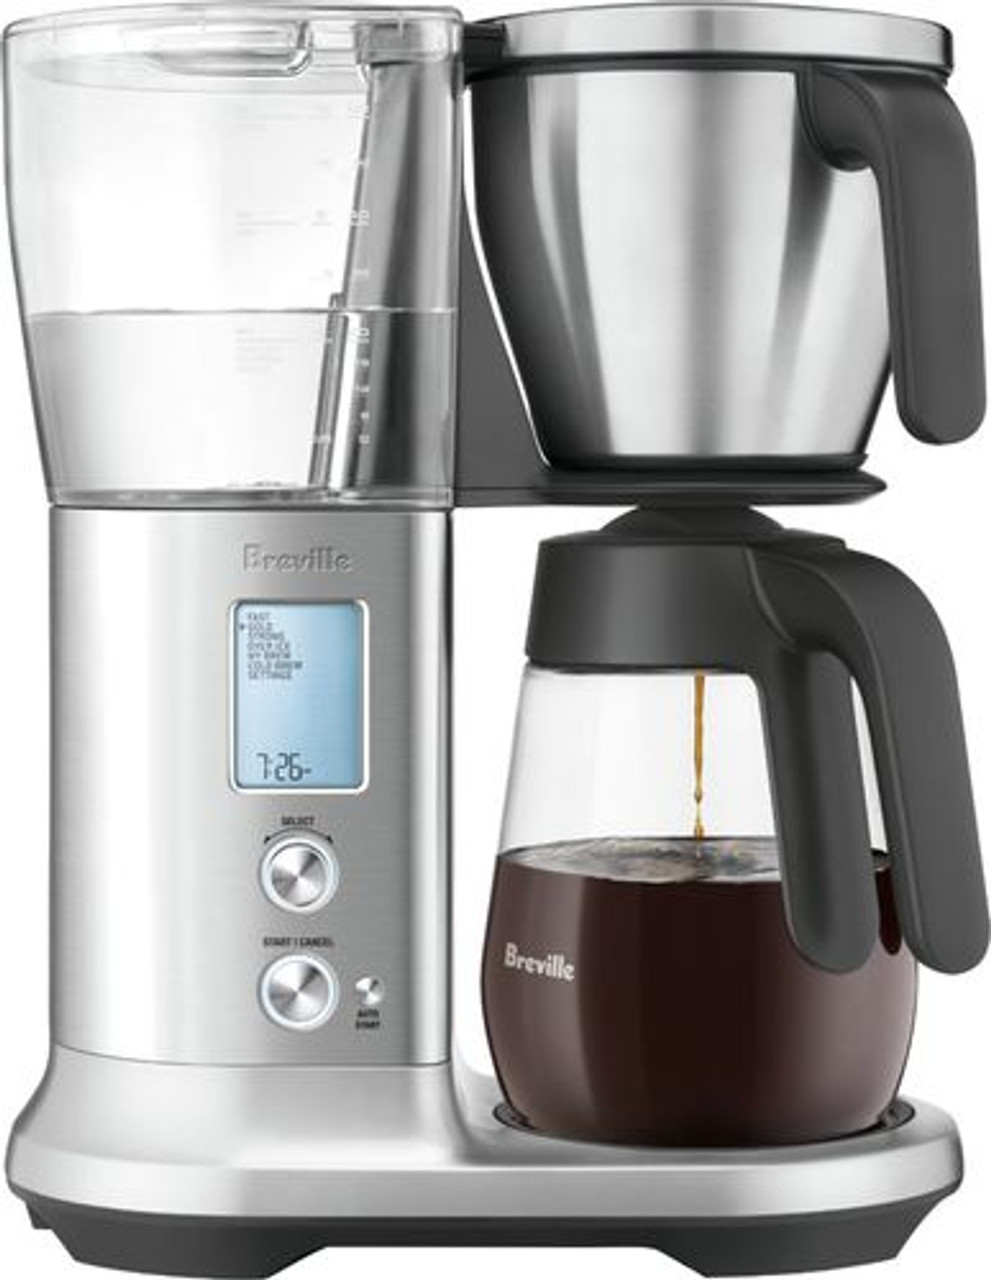 Breville - 12-Cup Coffee Maker - Brushed Stainless Steel